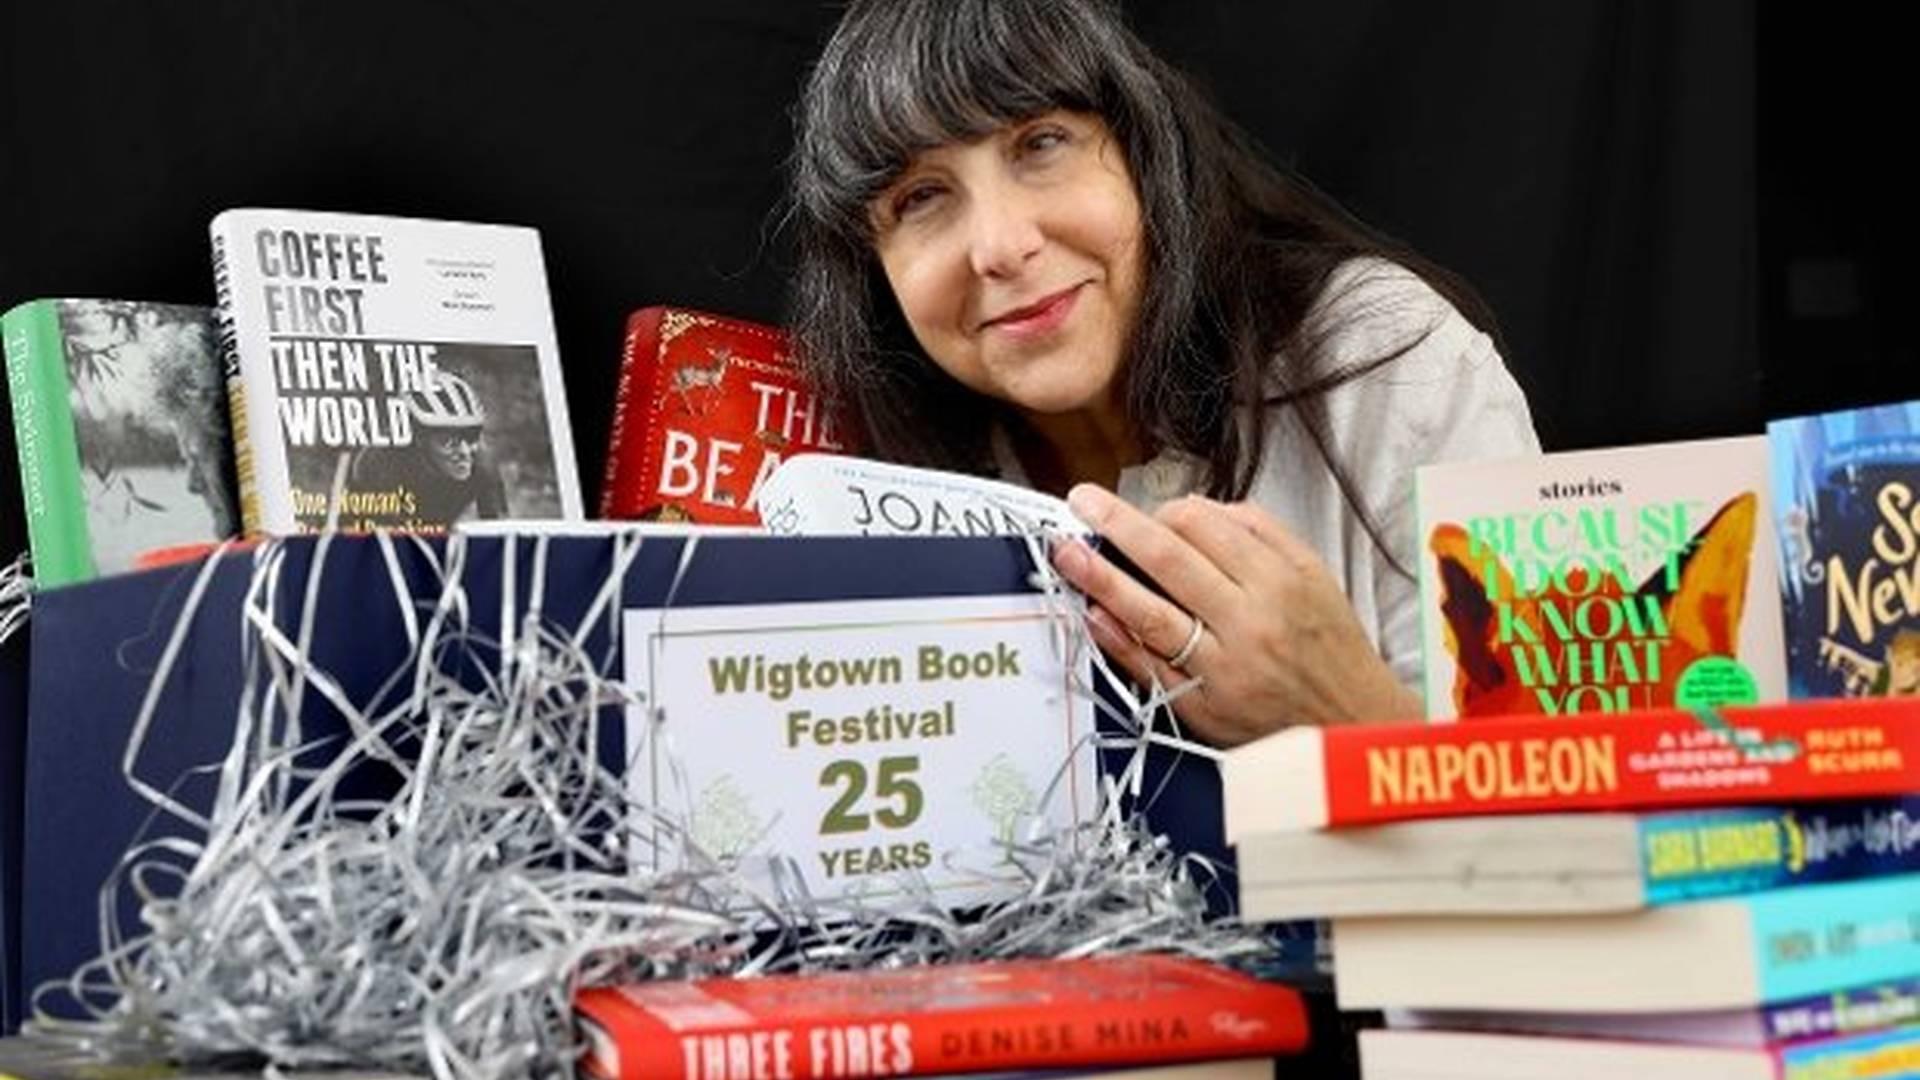 Wigtown Book Festival photo